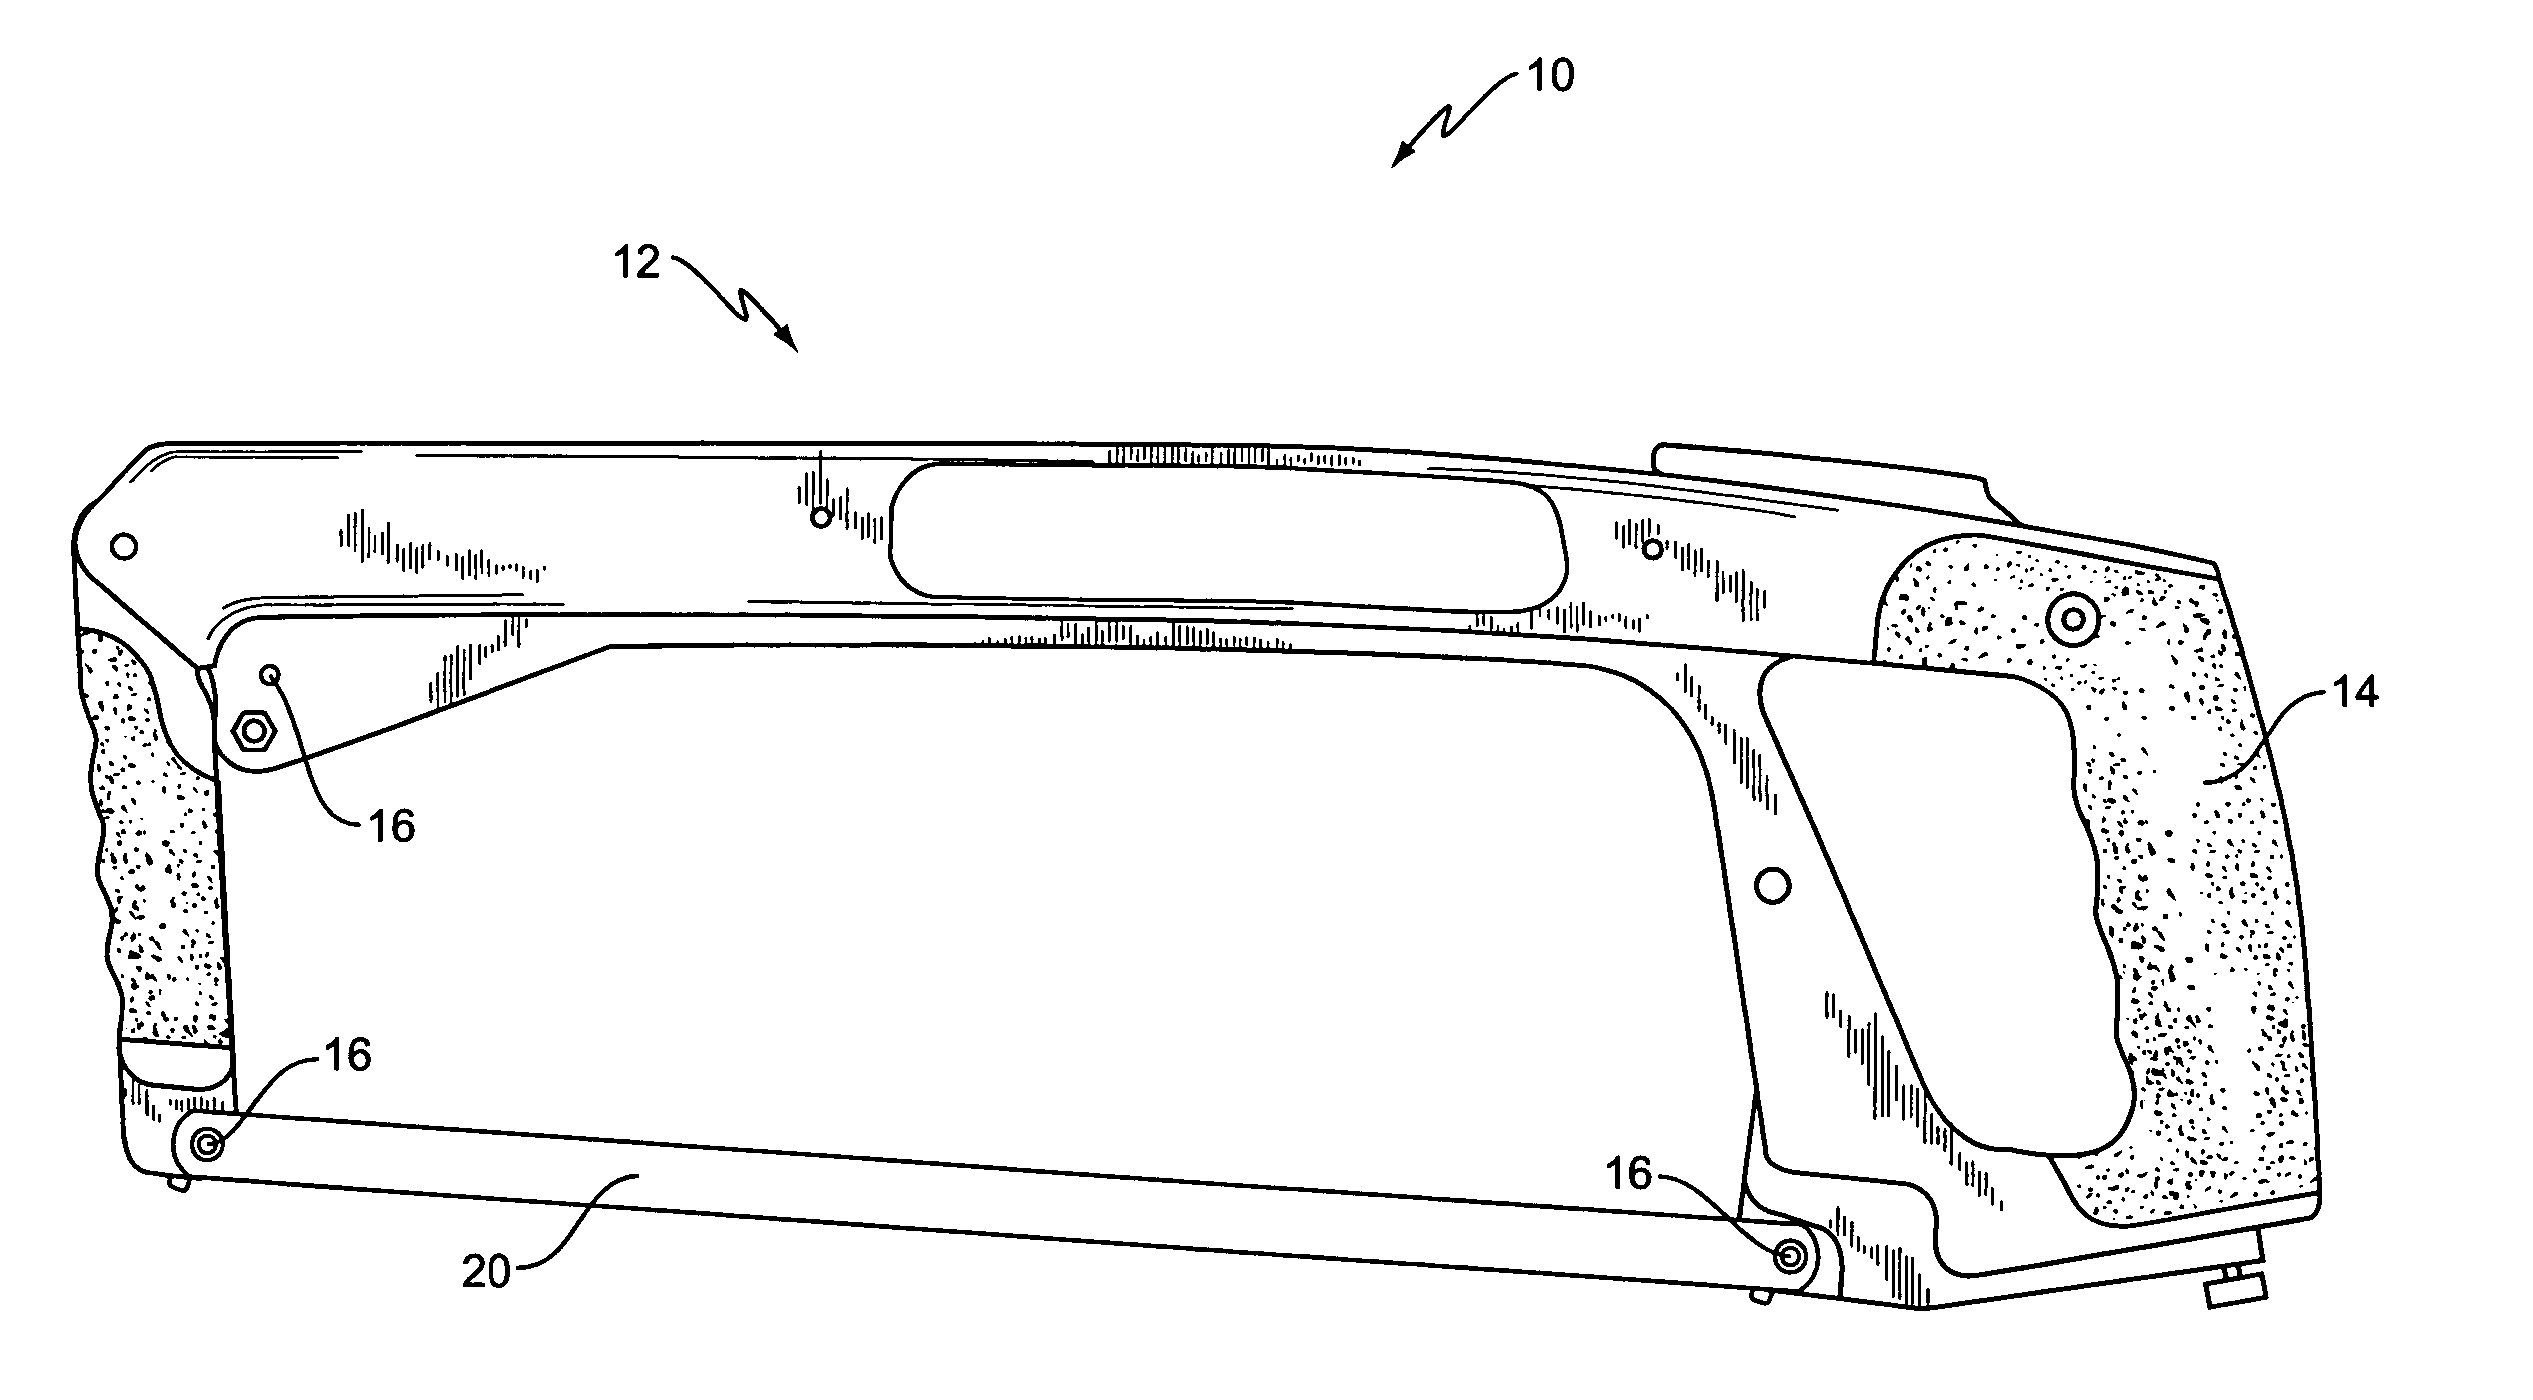 Hand tool with cutting blade having cutting surfaces with wear-enhancing coating thereon